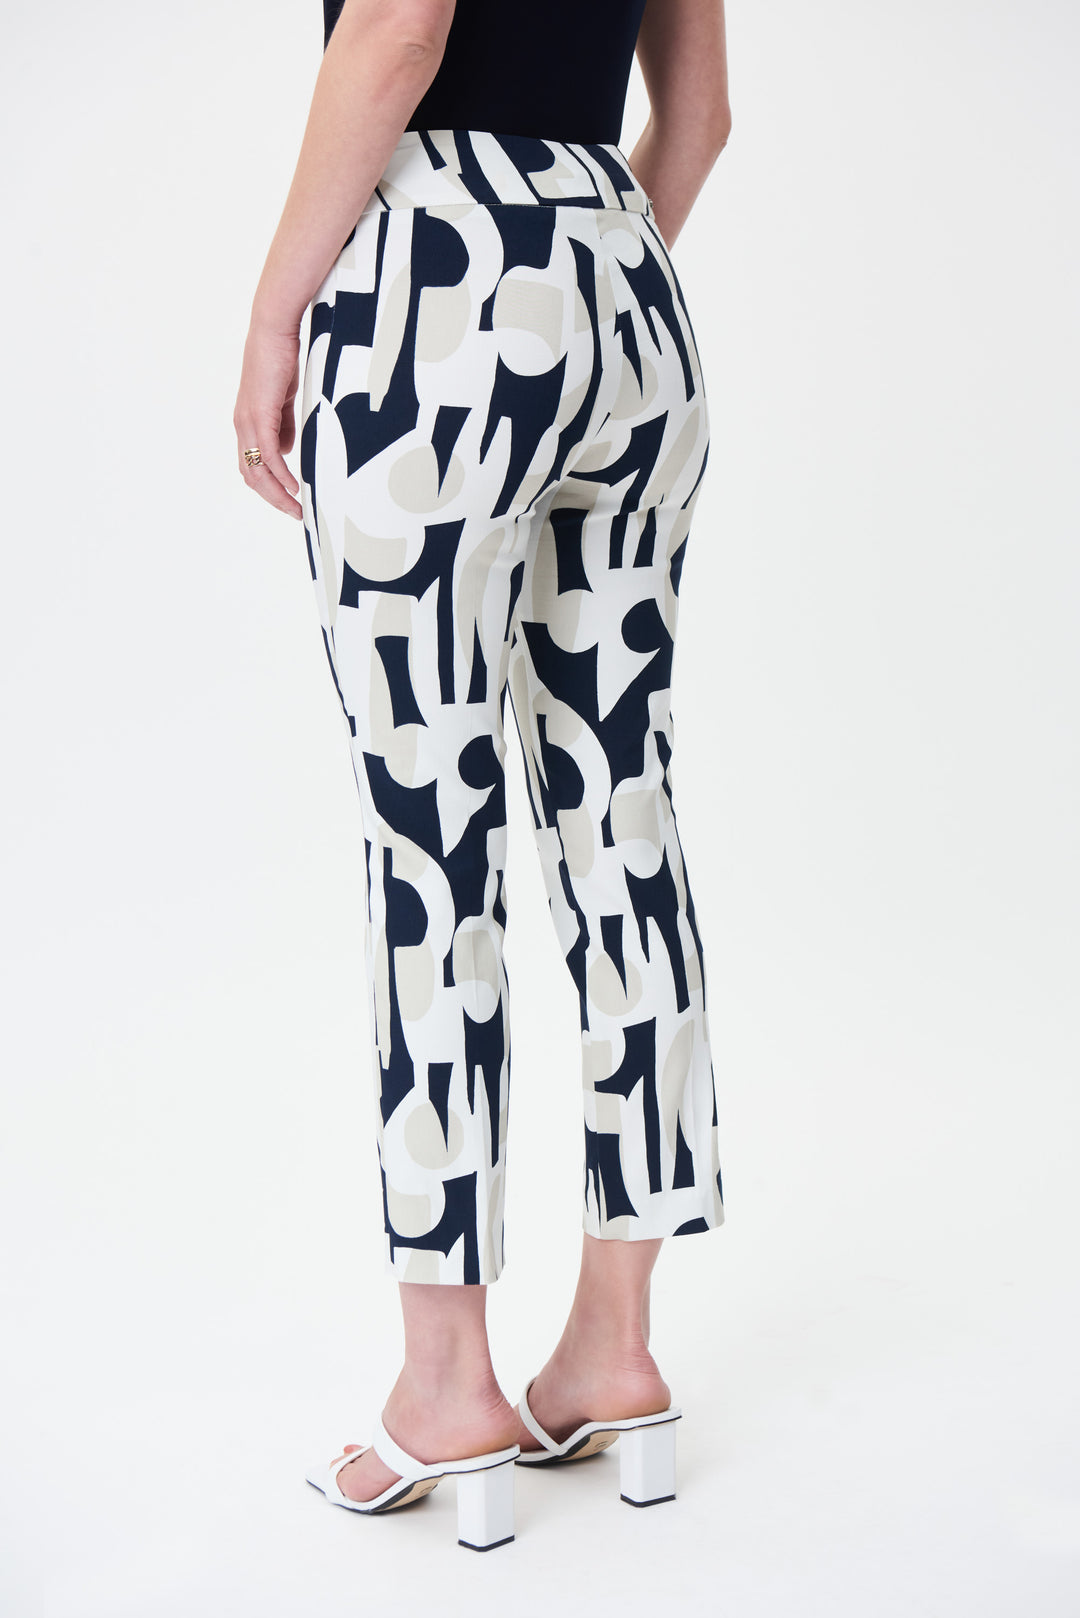 ABSTRACT GEO CROP PANT